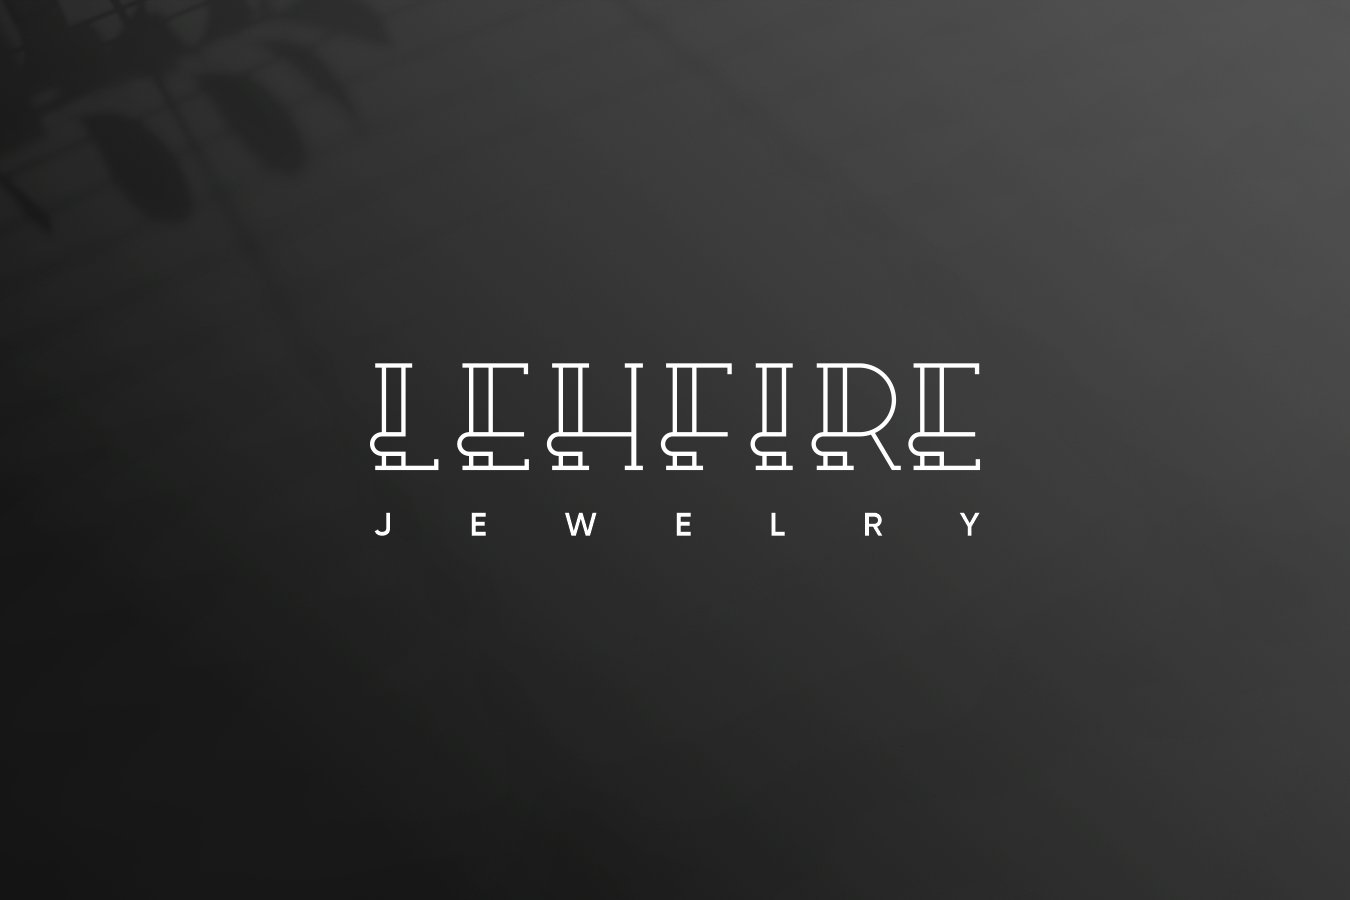 Lehfire preview image.